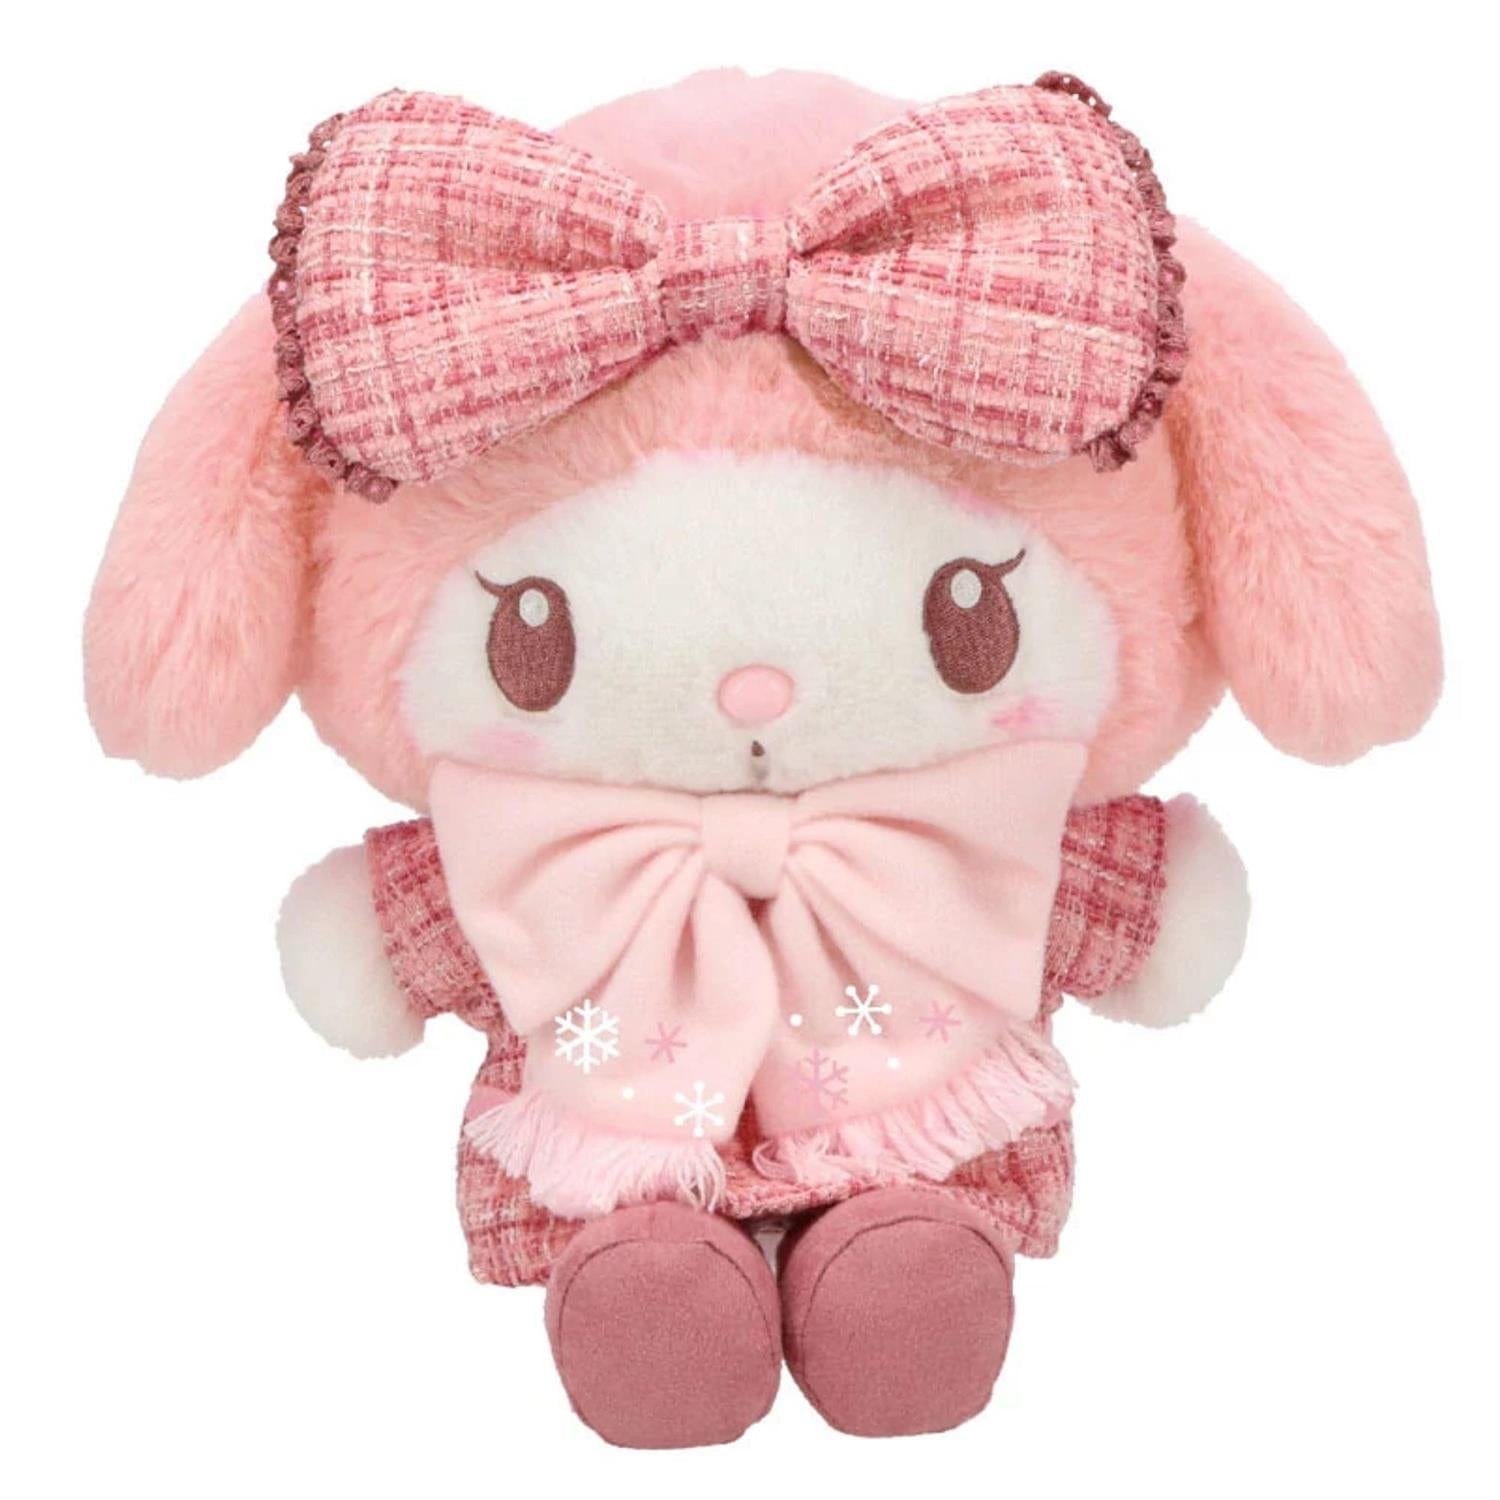 My Meloldy Winter Dress Series Deluxe Plush